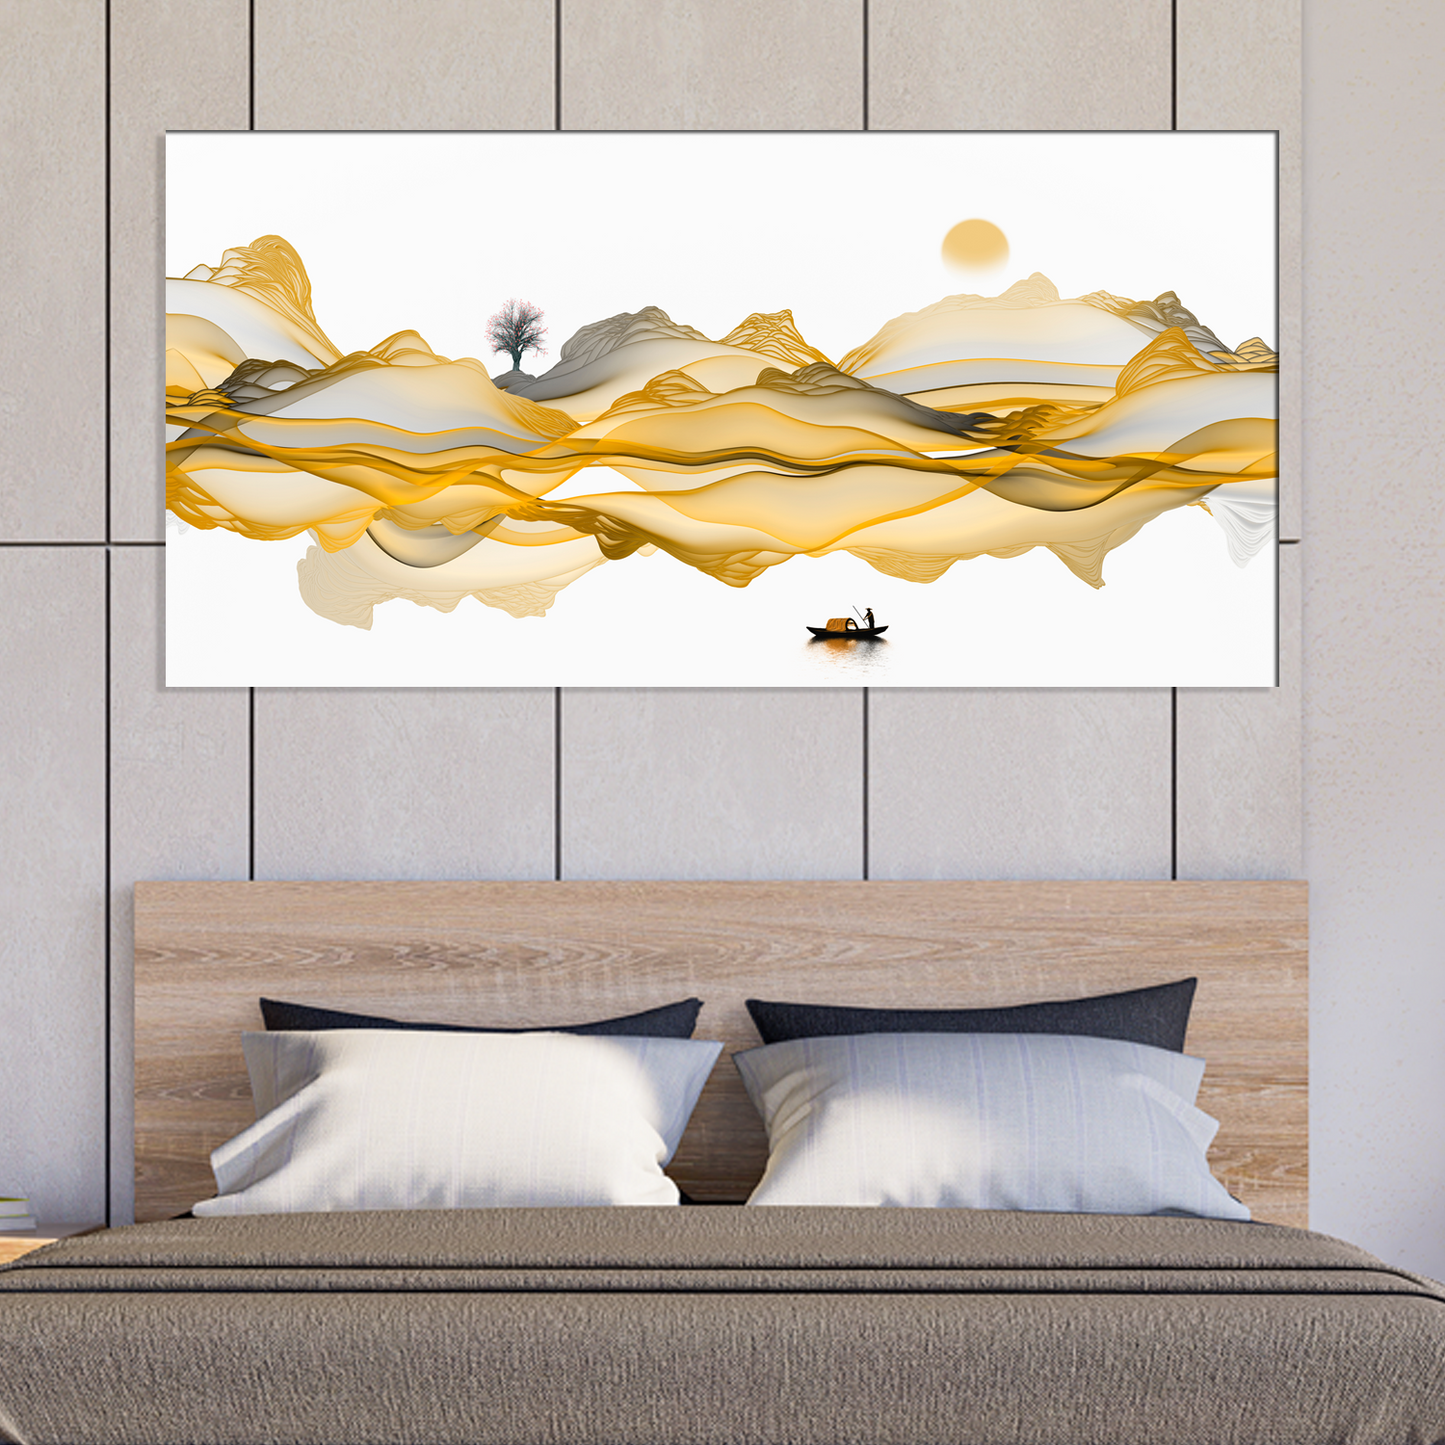 Abstract Golden Color Canvas Wall Painting